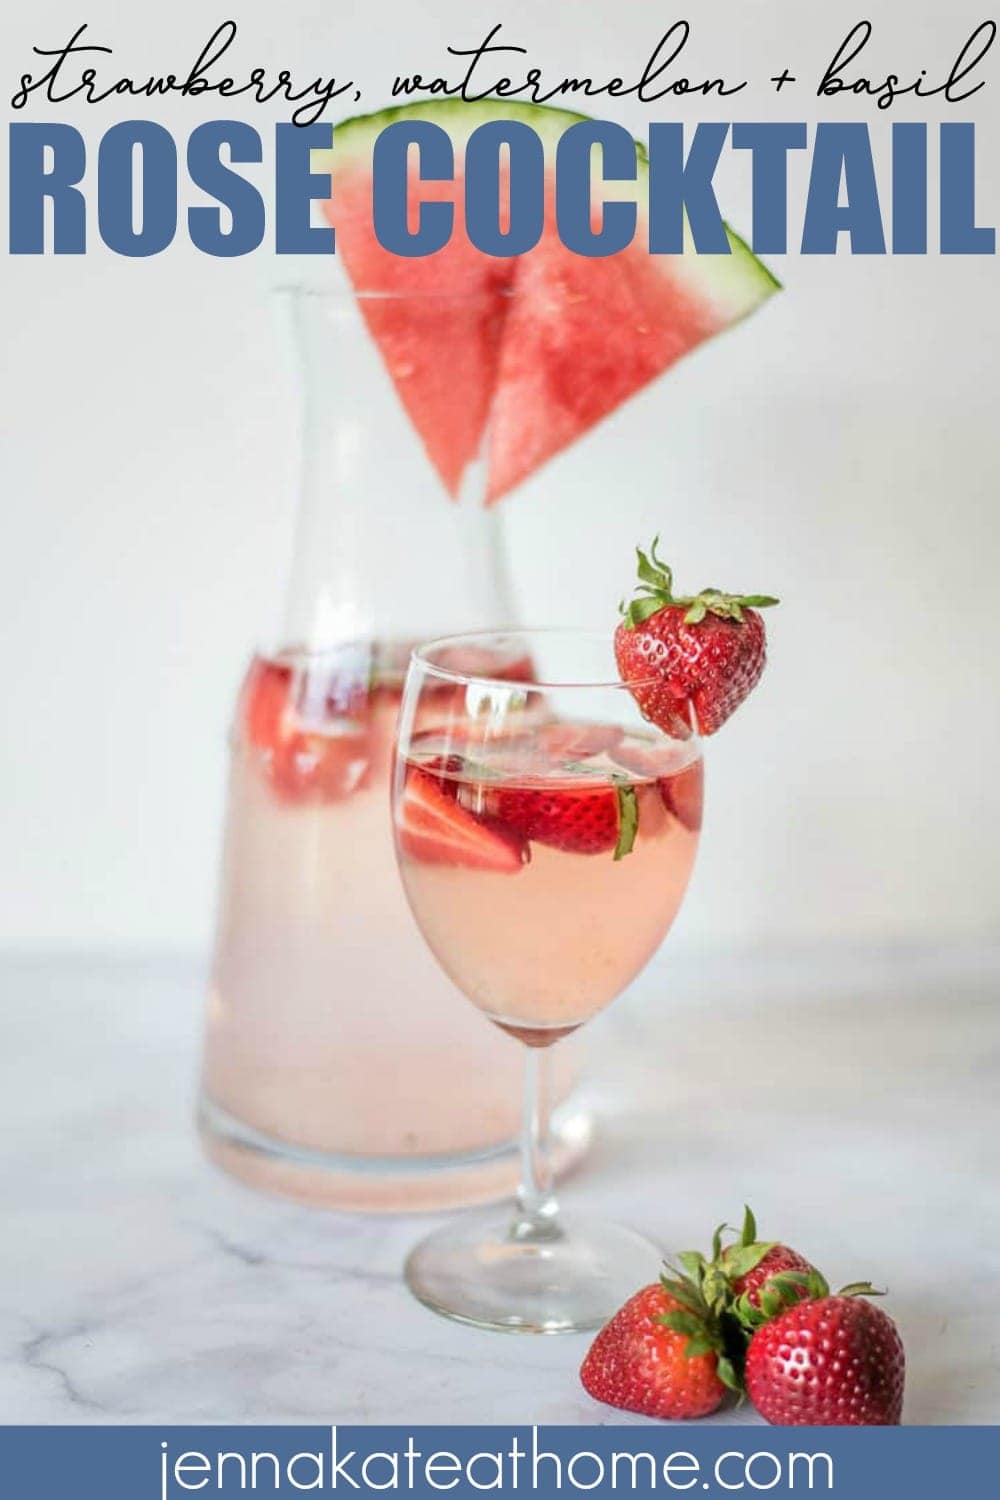 This simple rosé cocktail is the perfect summer sip. With the delicate flavors of strawberry, watermelon and a hint of basil, you'll be tempted to keep the entire pitcher for yourself!